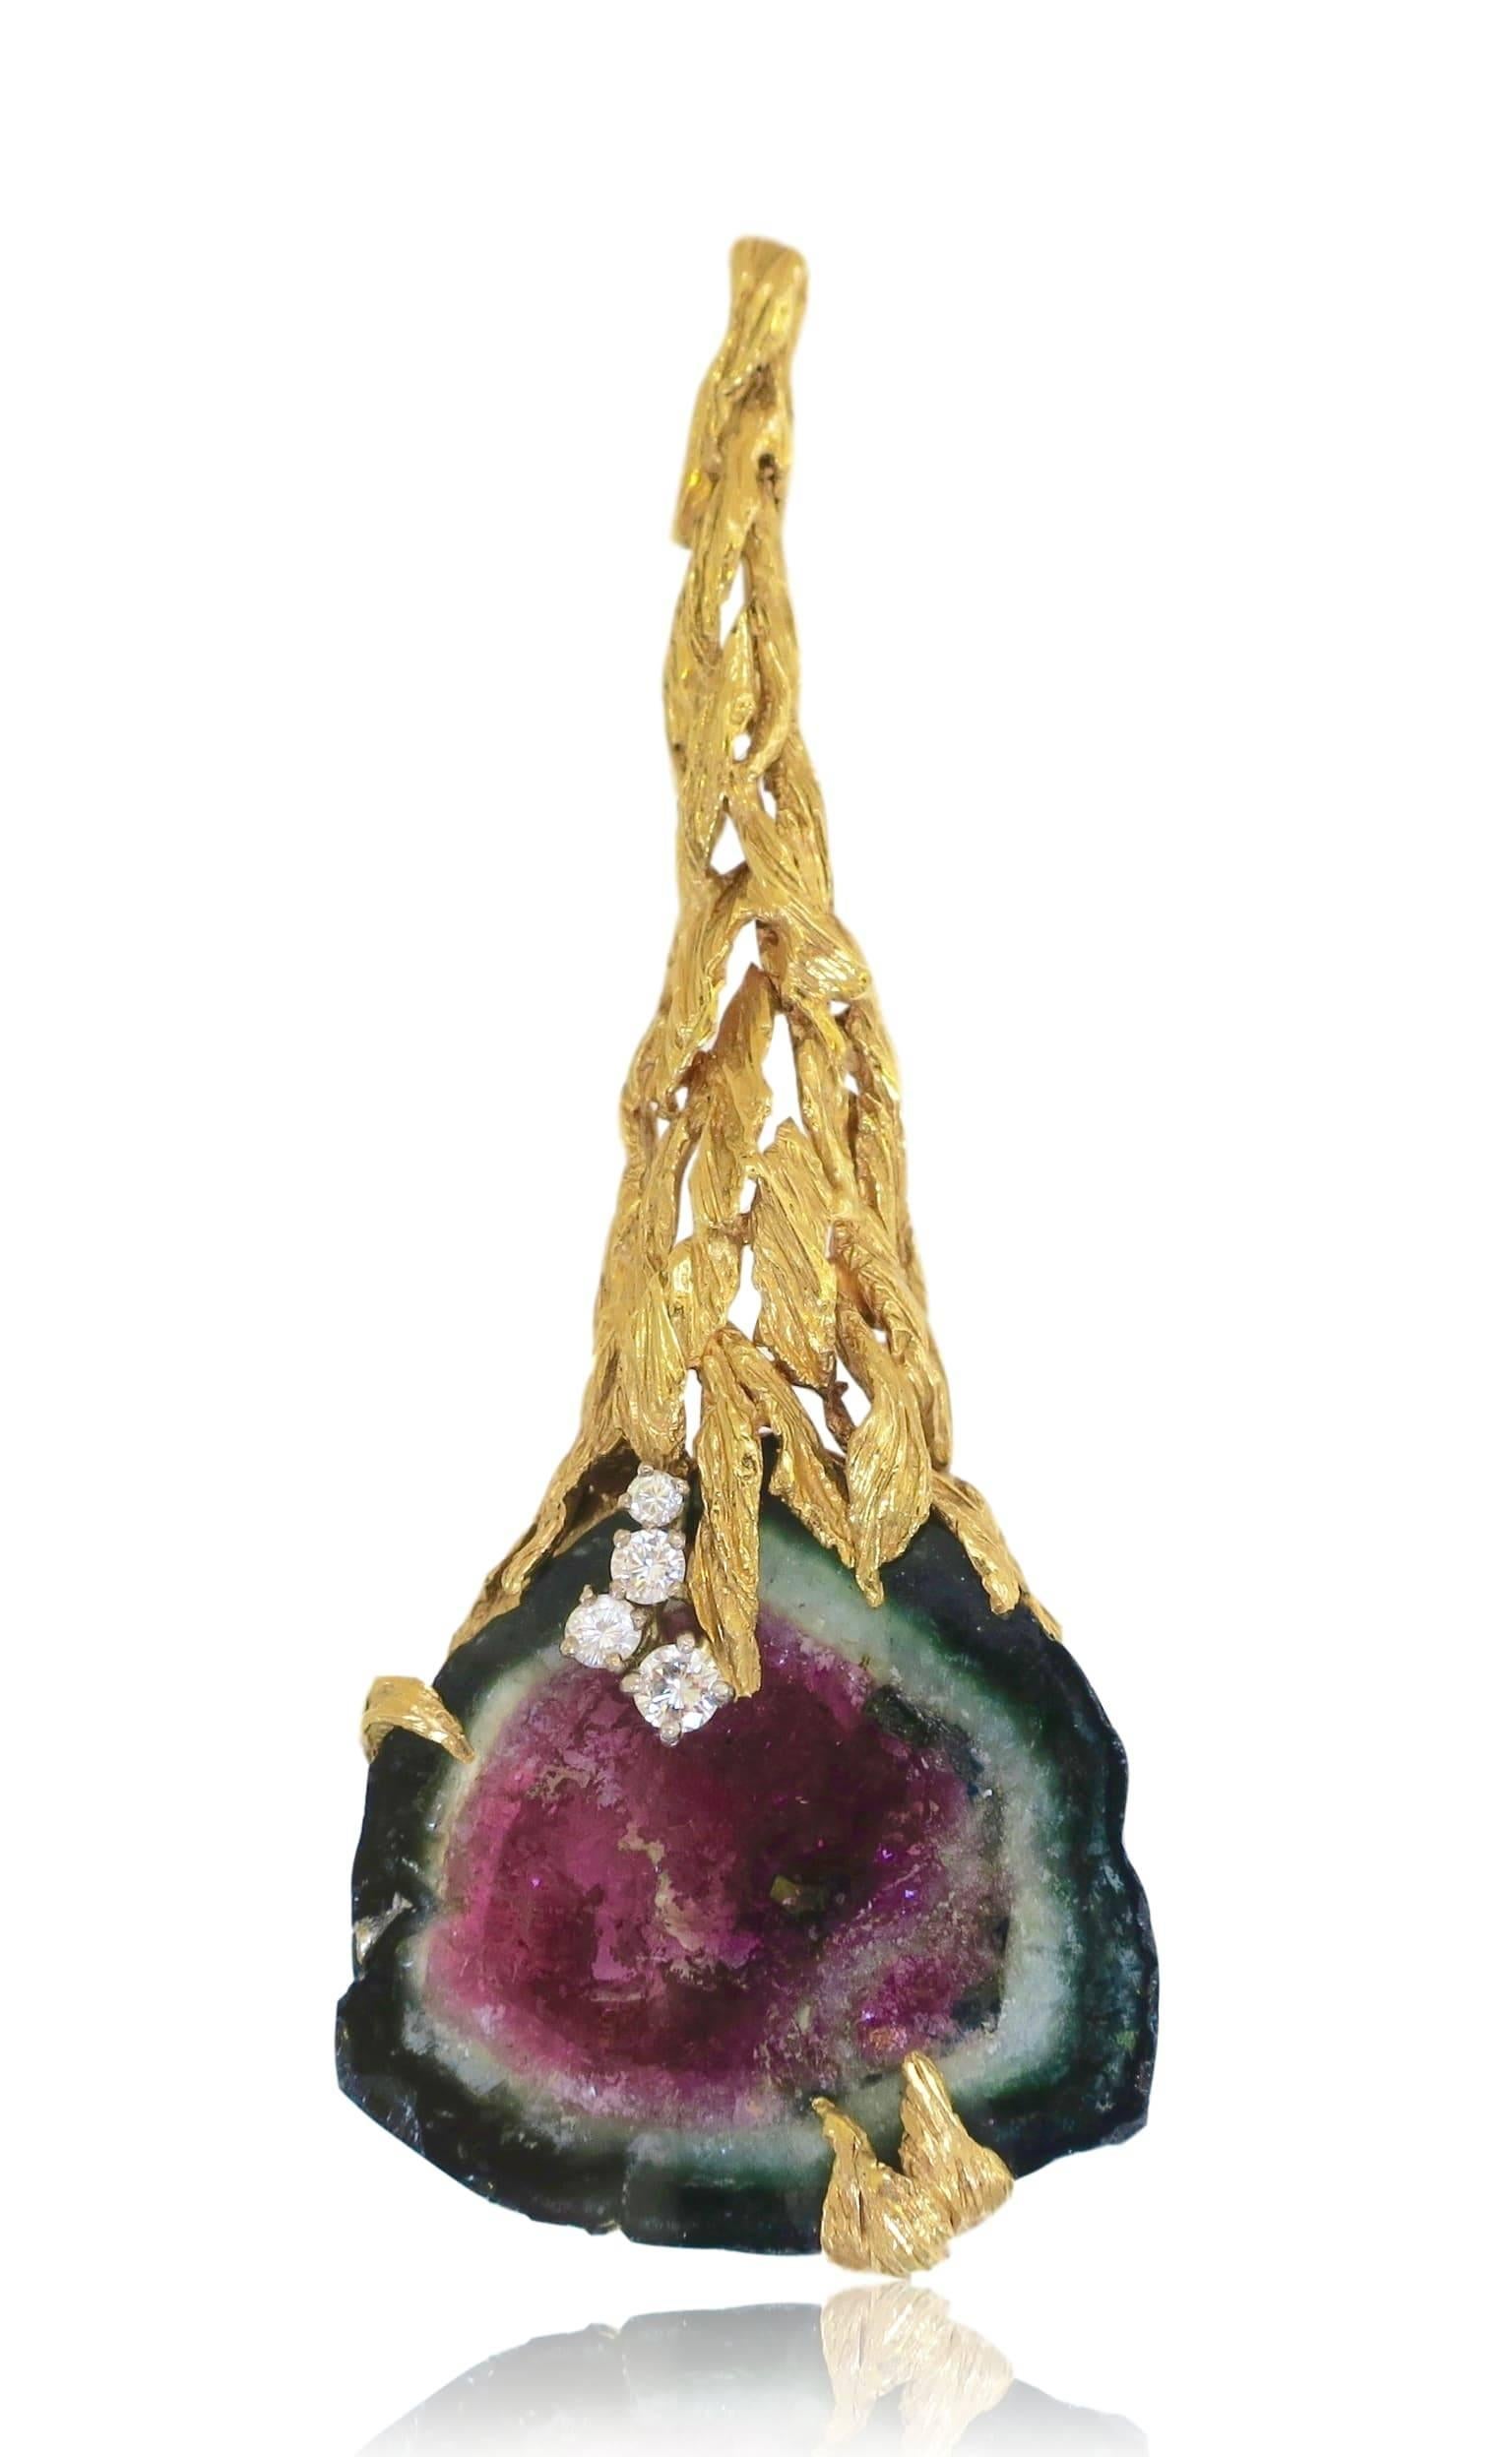 Sculptural pendant necklace by Swiss designer Gilbert Albert. The 3"long pendant with textured gold in the form of stylized leaves holds a dramatically large slice of watermelon tourmaline. Accented with diamond "dew drops" .
A smart